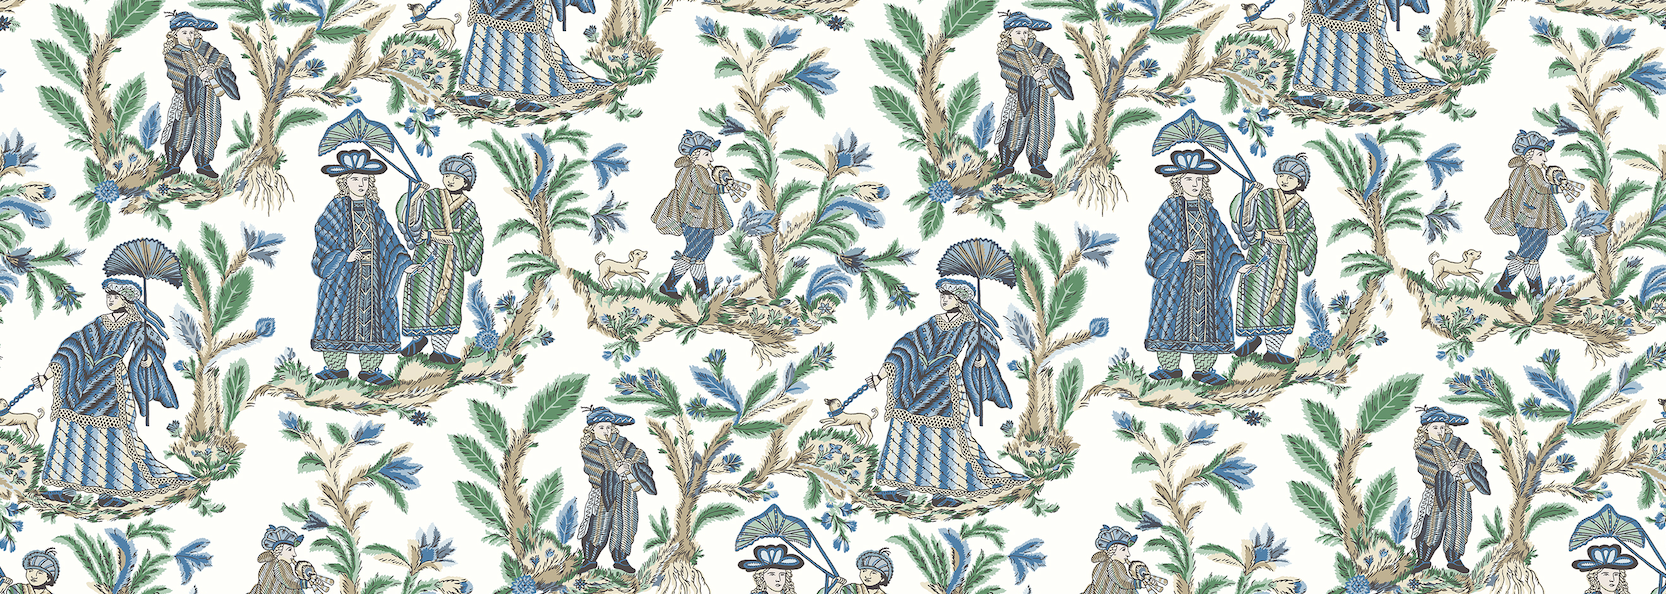 Introducing chintzes and wallpapers inspired by Faraway Lands